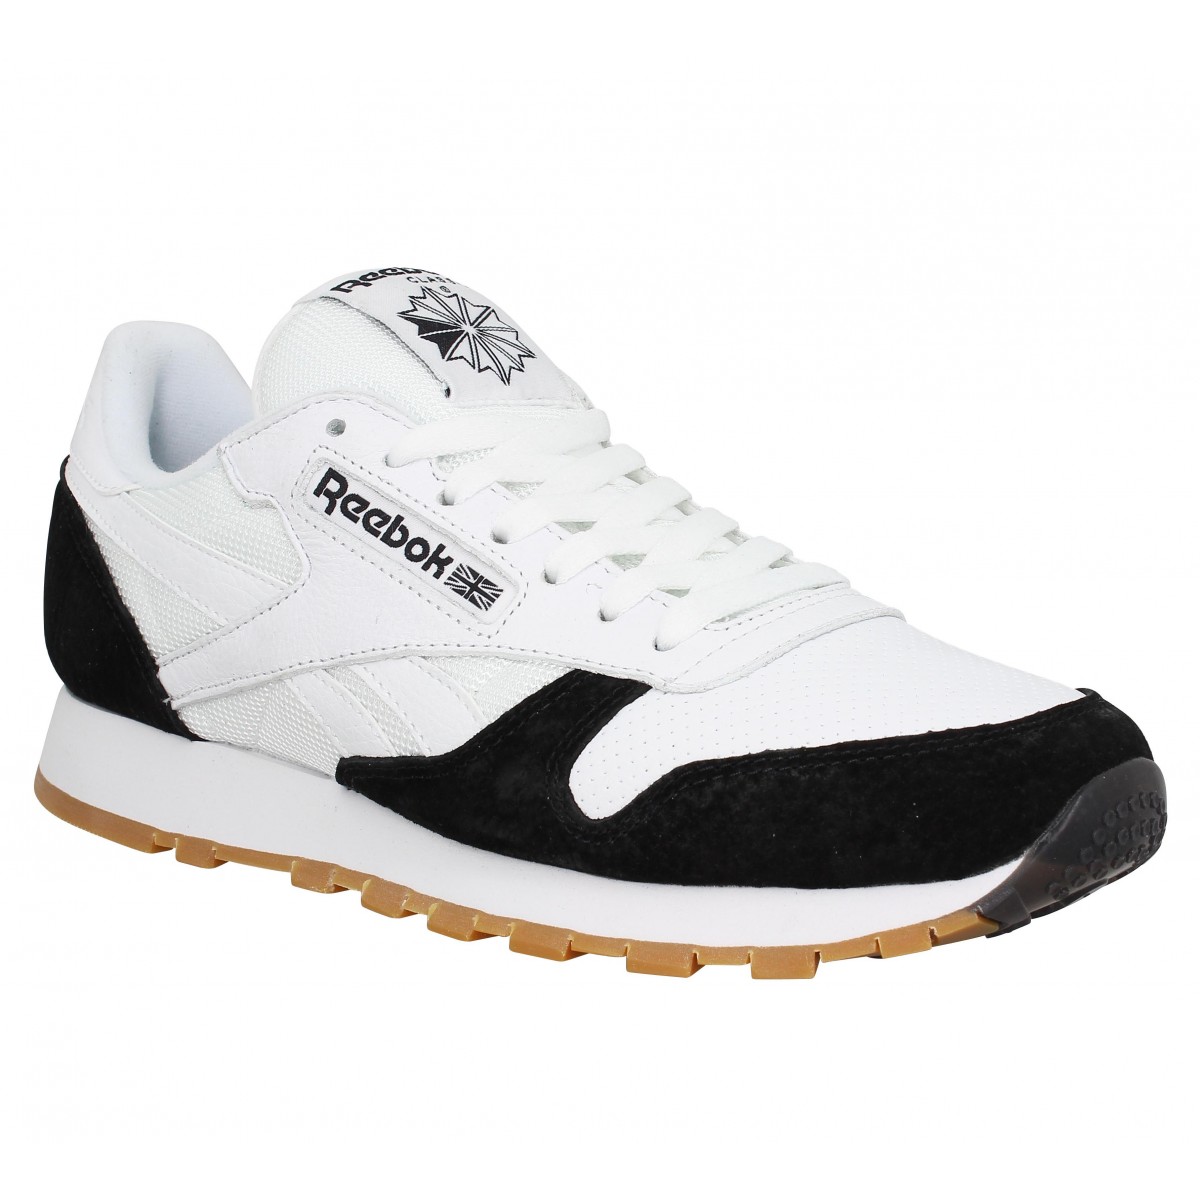 reebok classic leather homme chaussures